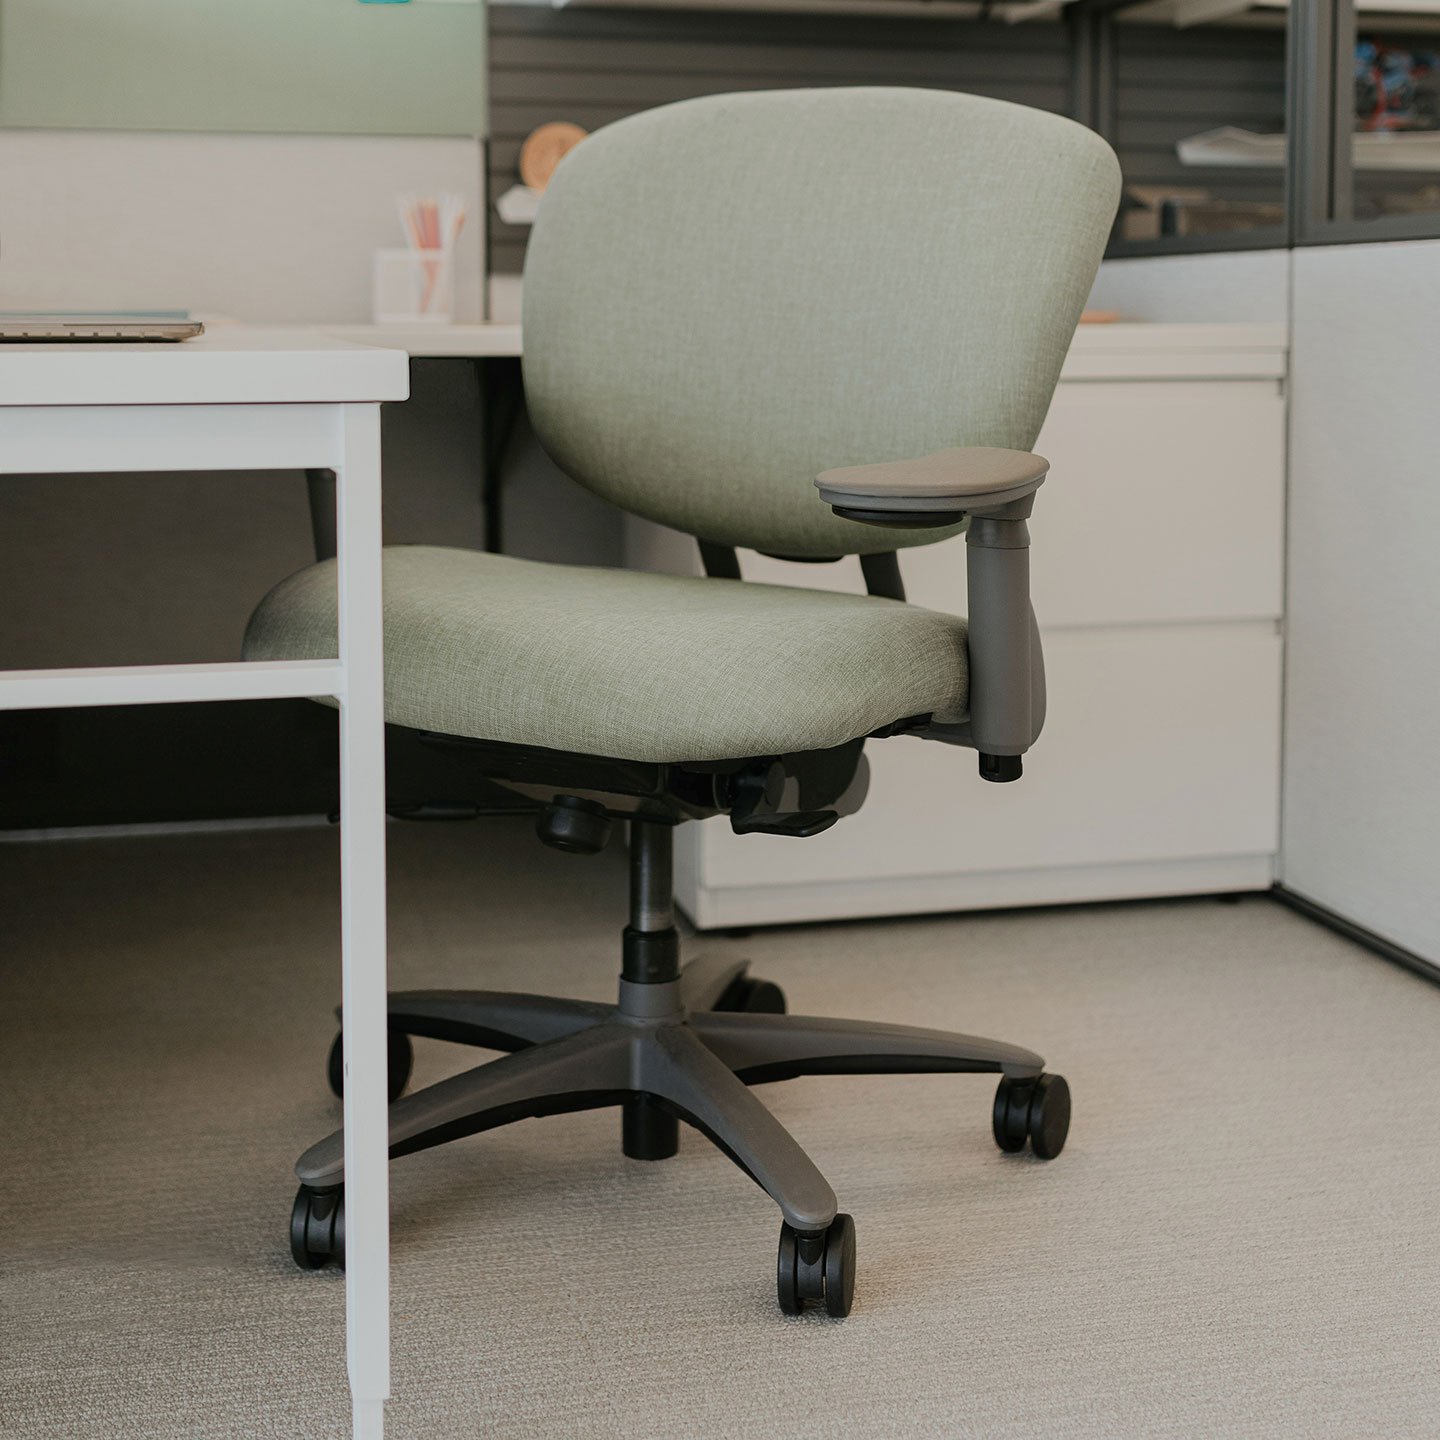 Haworth Improv XL desk chair in olive green upholstery at a workstation